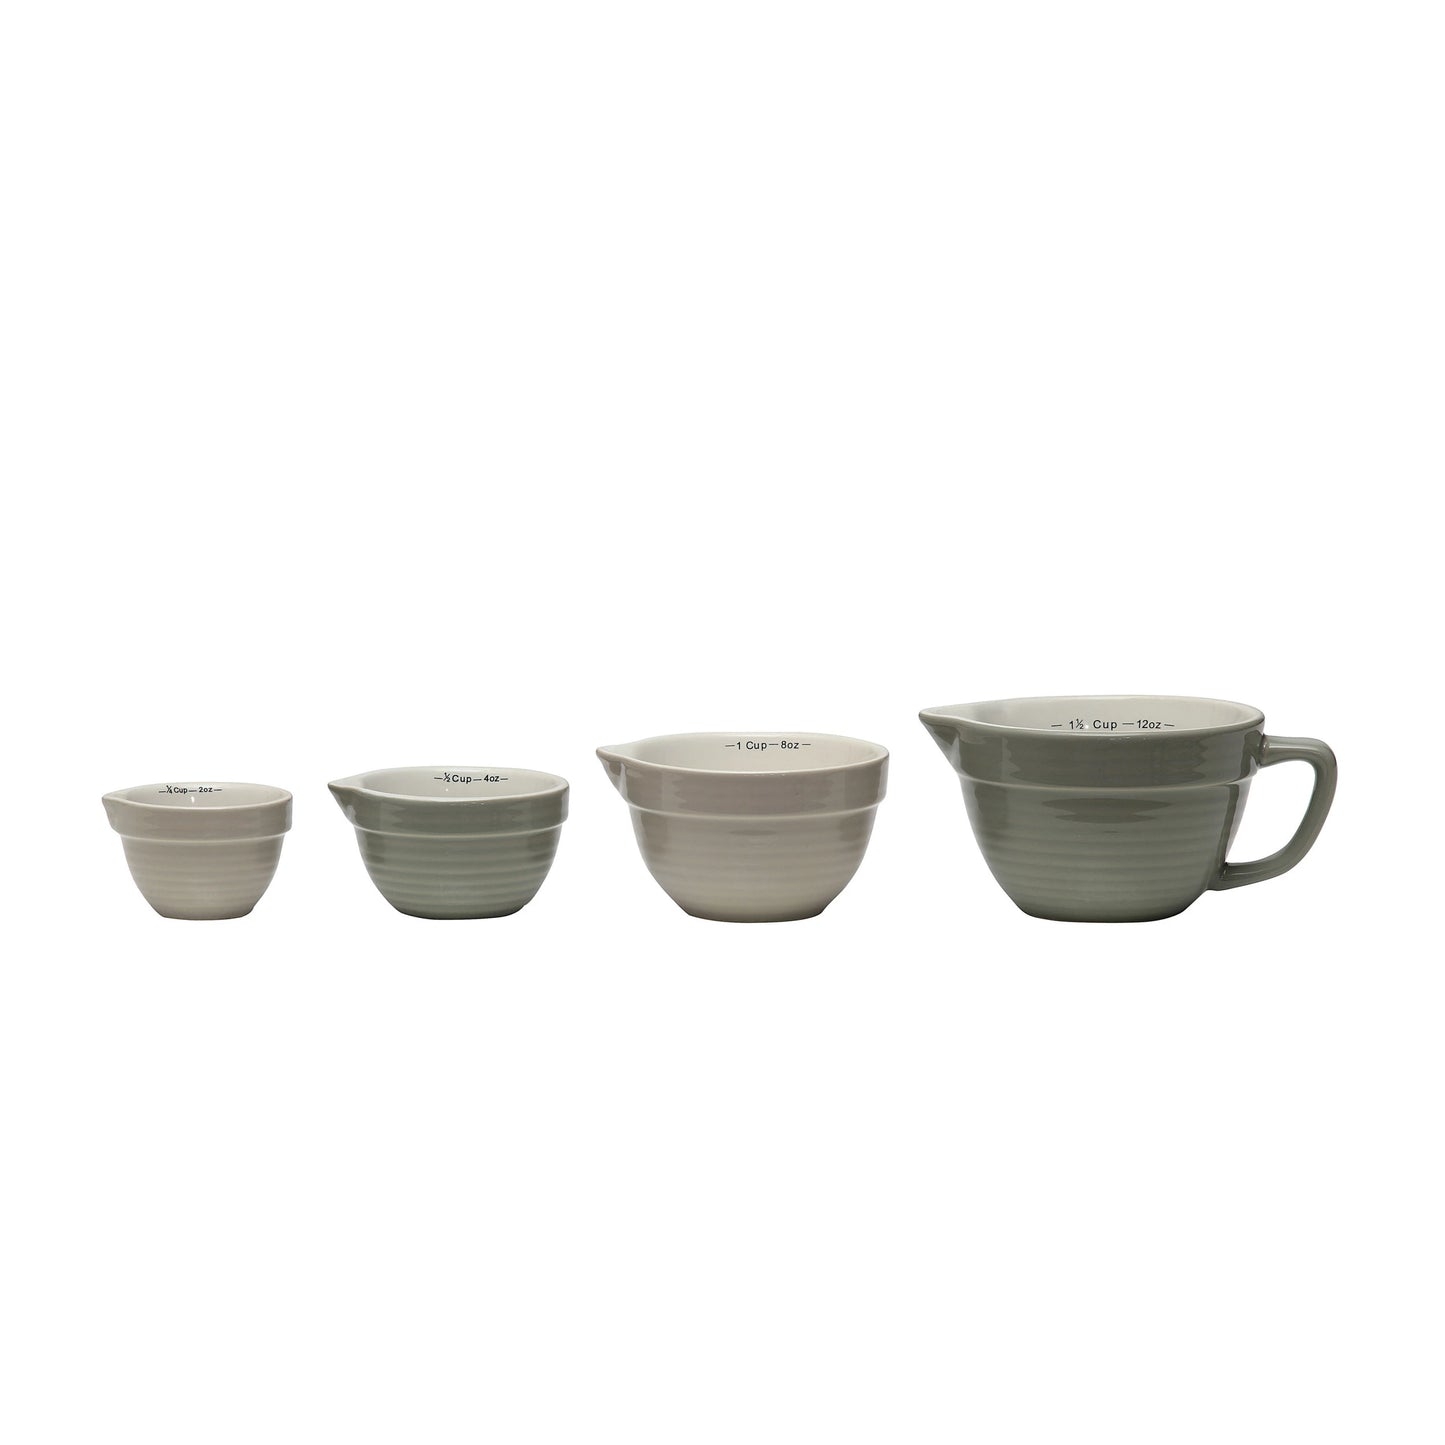 Batter Bowl Measuring Cups, The Feathered Farmhouse